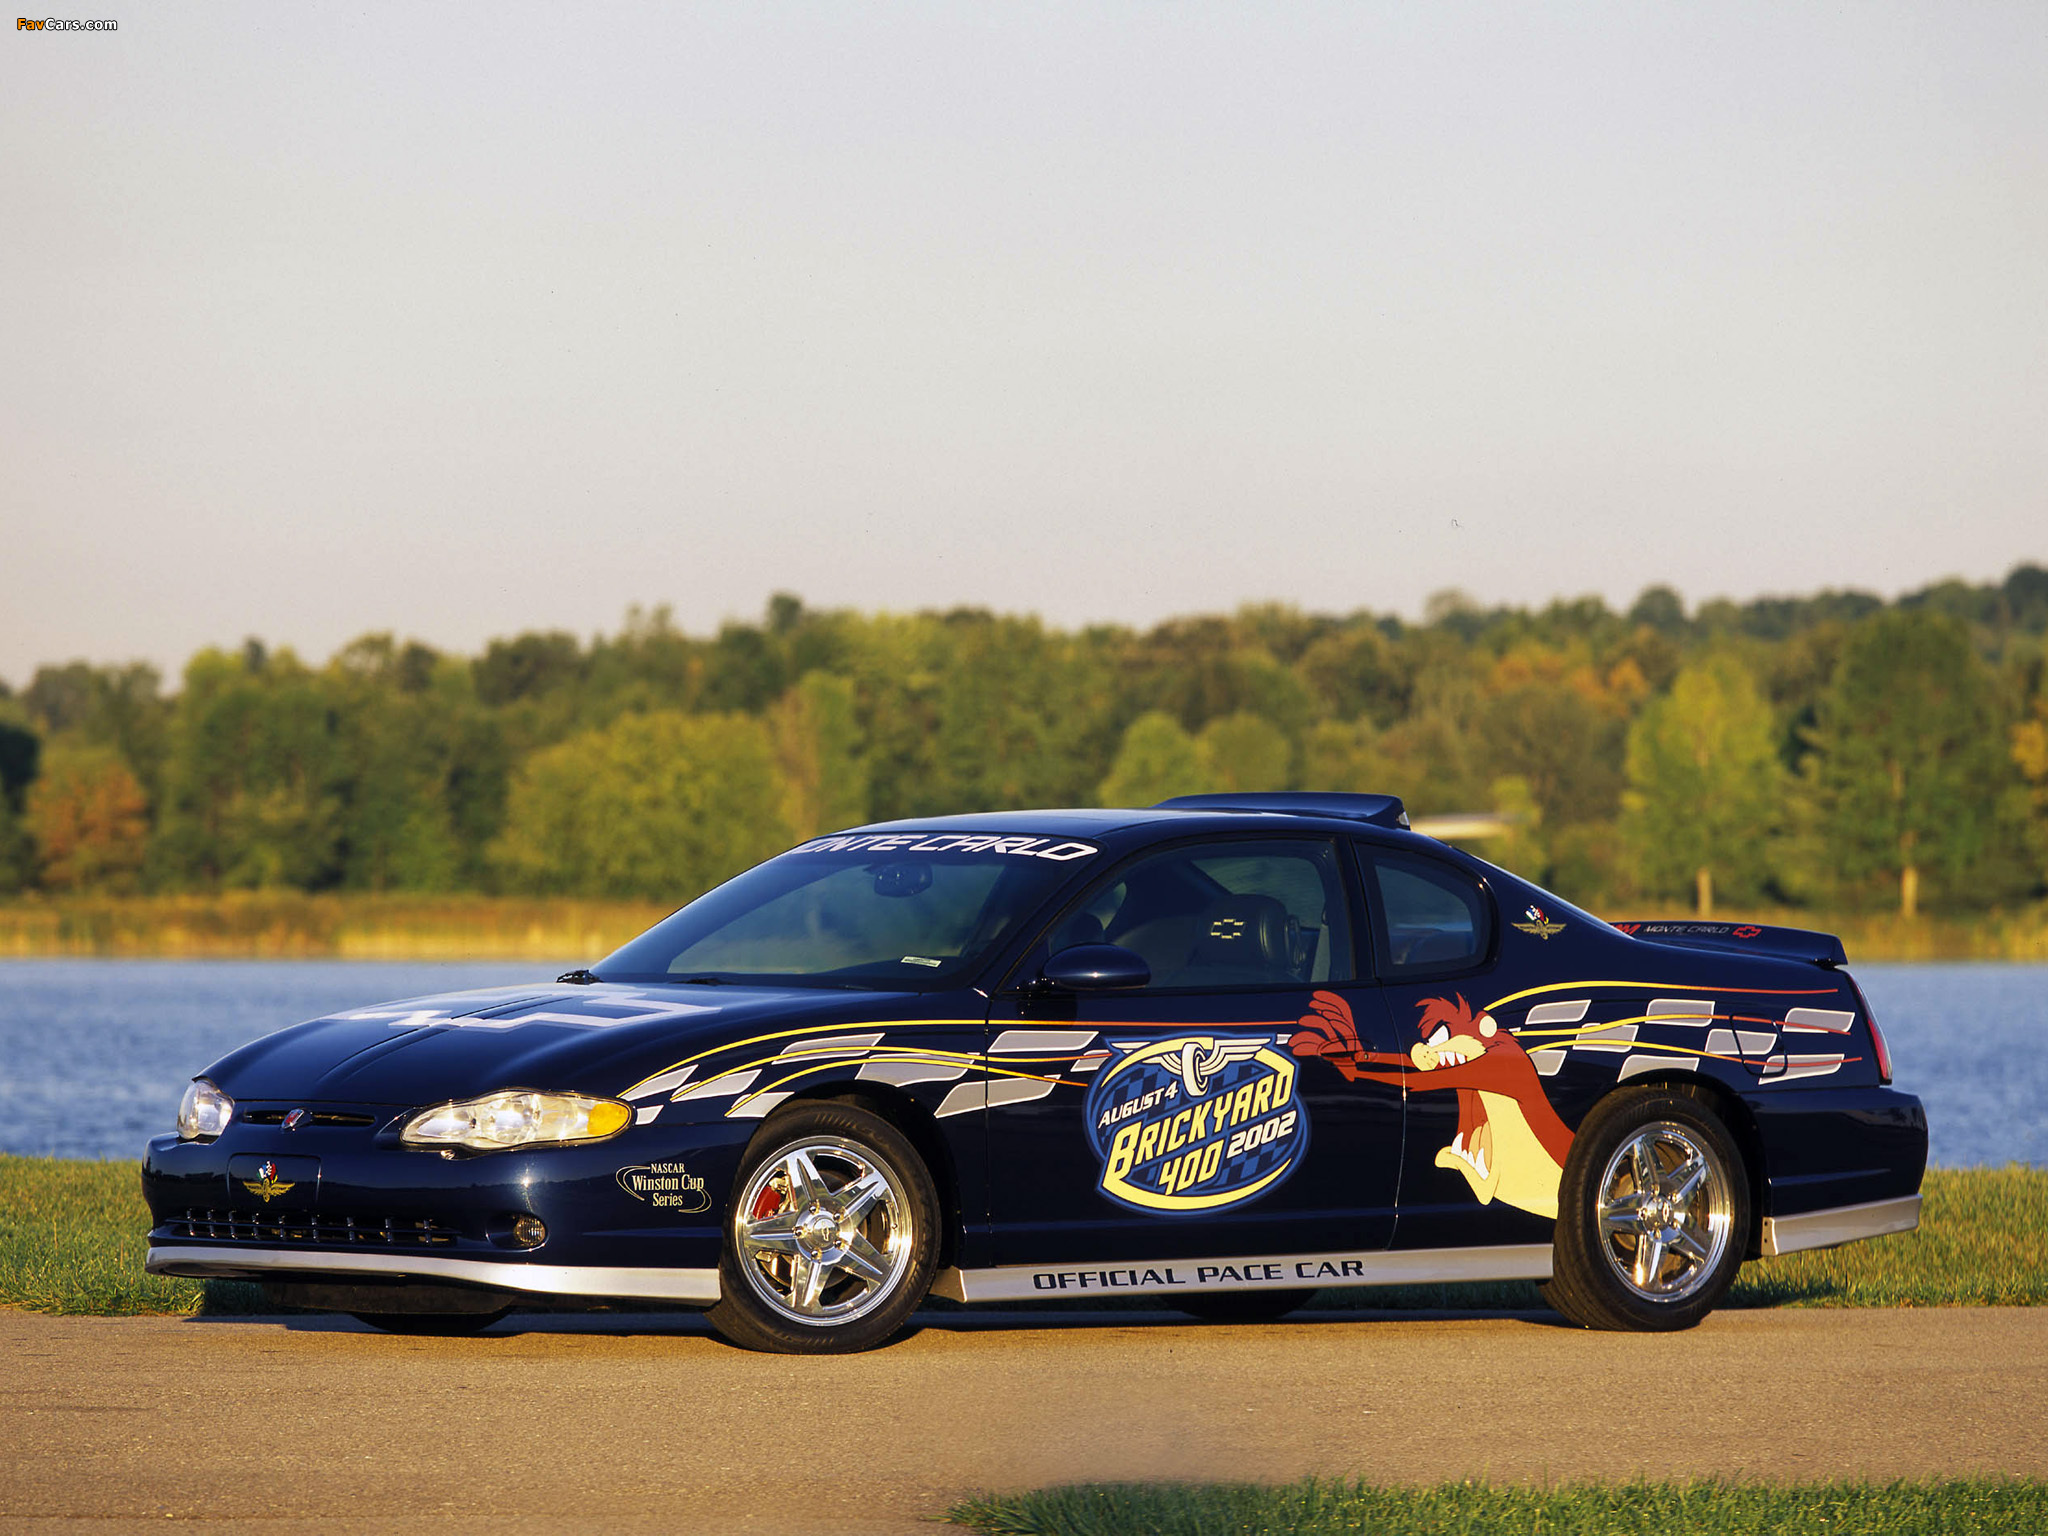 Chevrolet Monte Carlo Brickyard 400 Pace Car 2002 pictures (2048 x 1536)